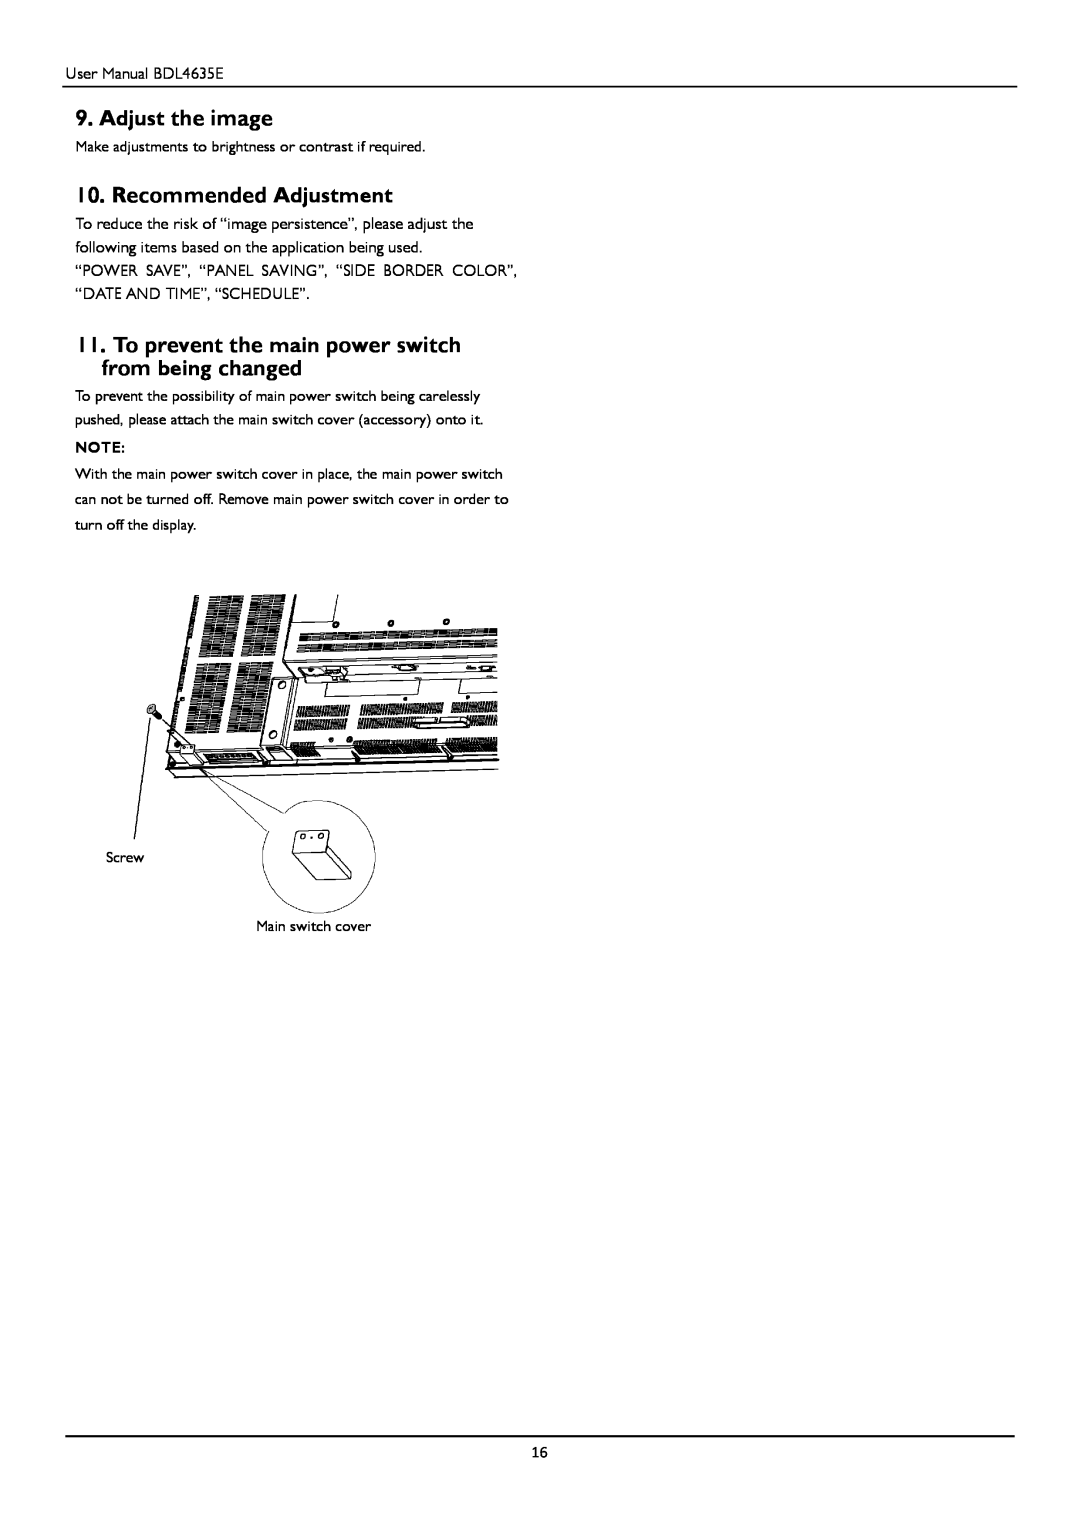 Philips BDL4635E/00 user manual Adjust the image, Recommended Adjustment 